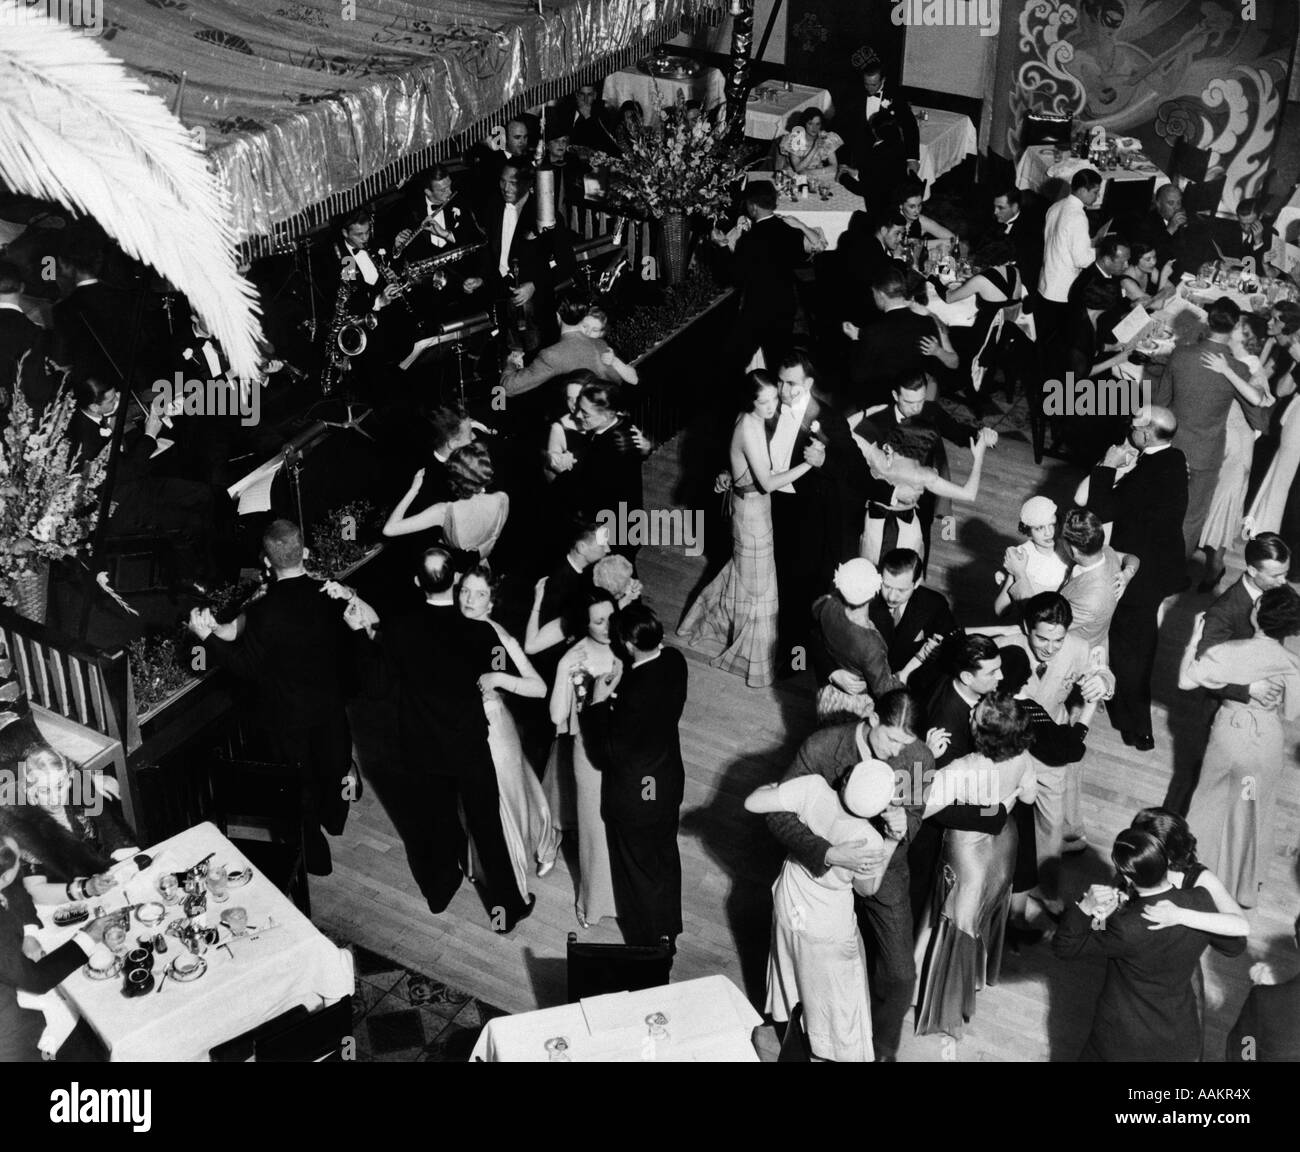 1930s 1940s VIEW LOOKING DOWN ON BAND AND COUPLES DANCING ON NIGHTCLUB DANCE FLOOR Stock Photo